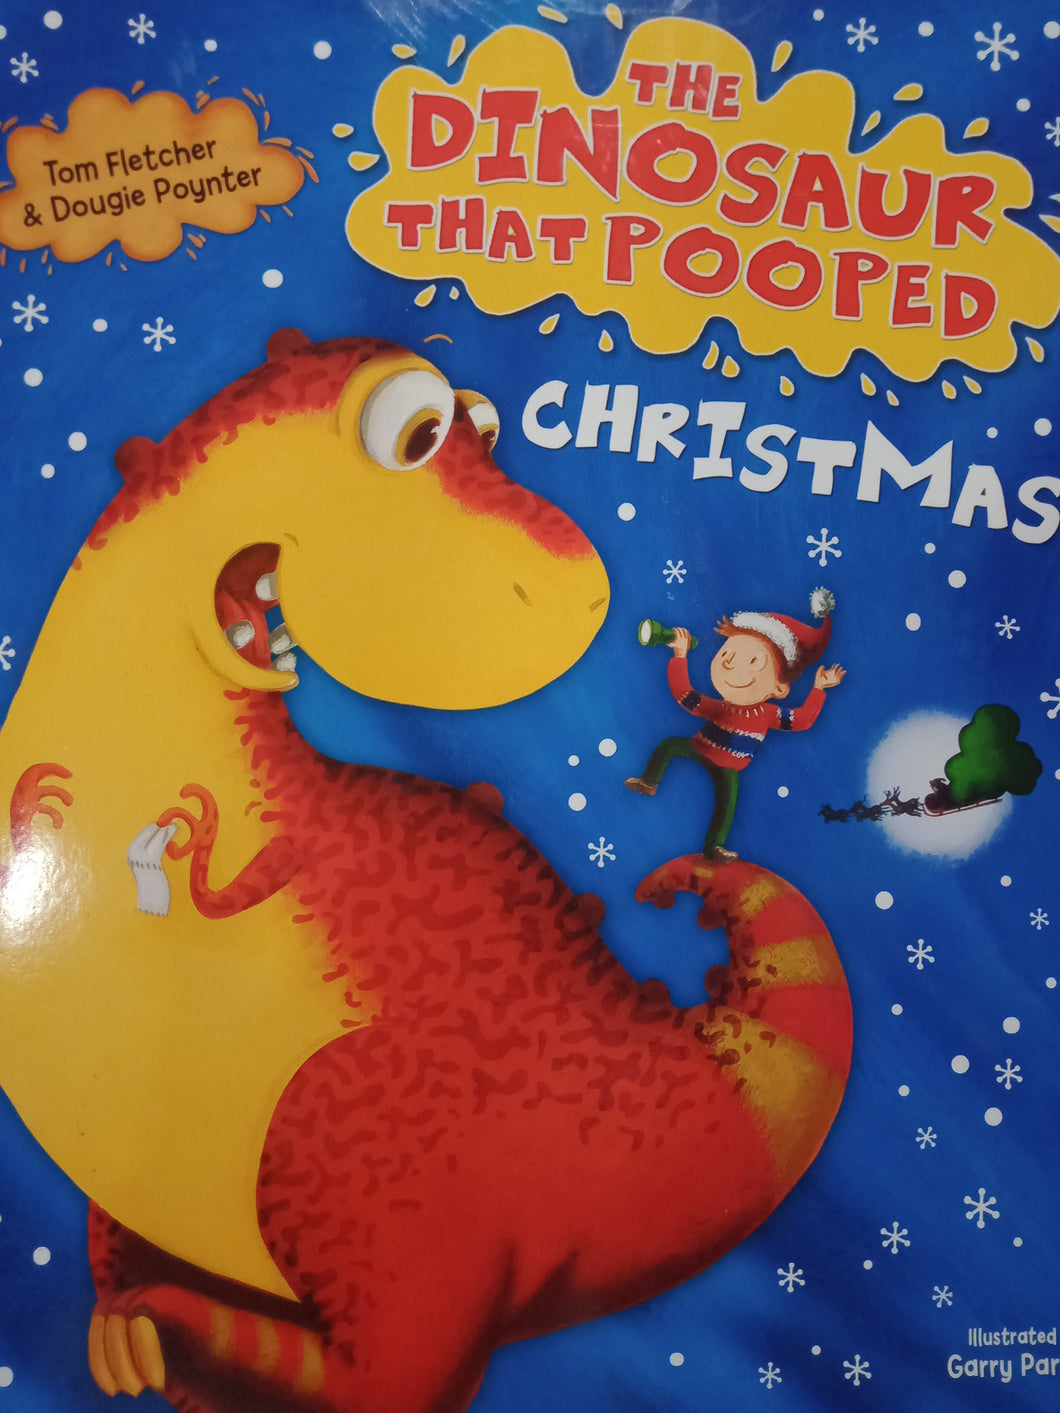 The Dinosaur that Pooped by Tom Fletcher